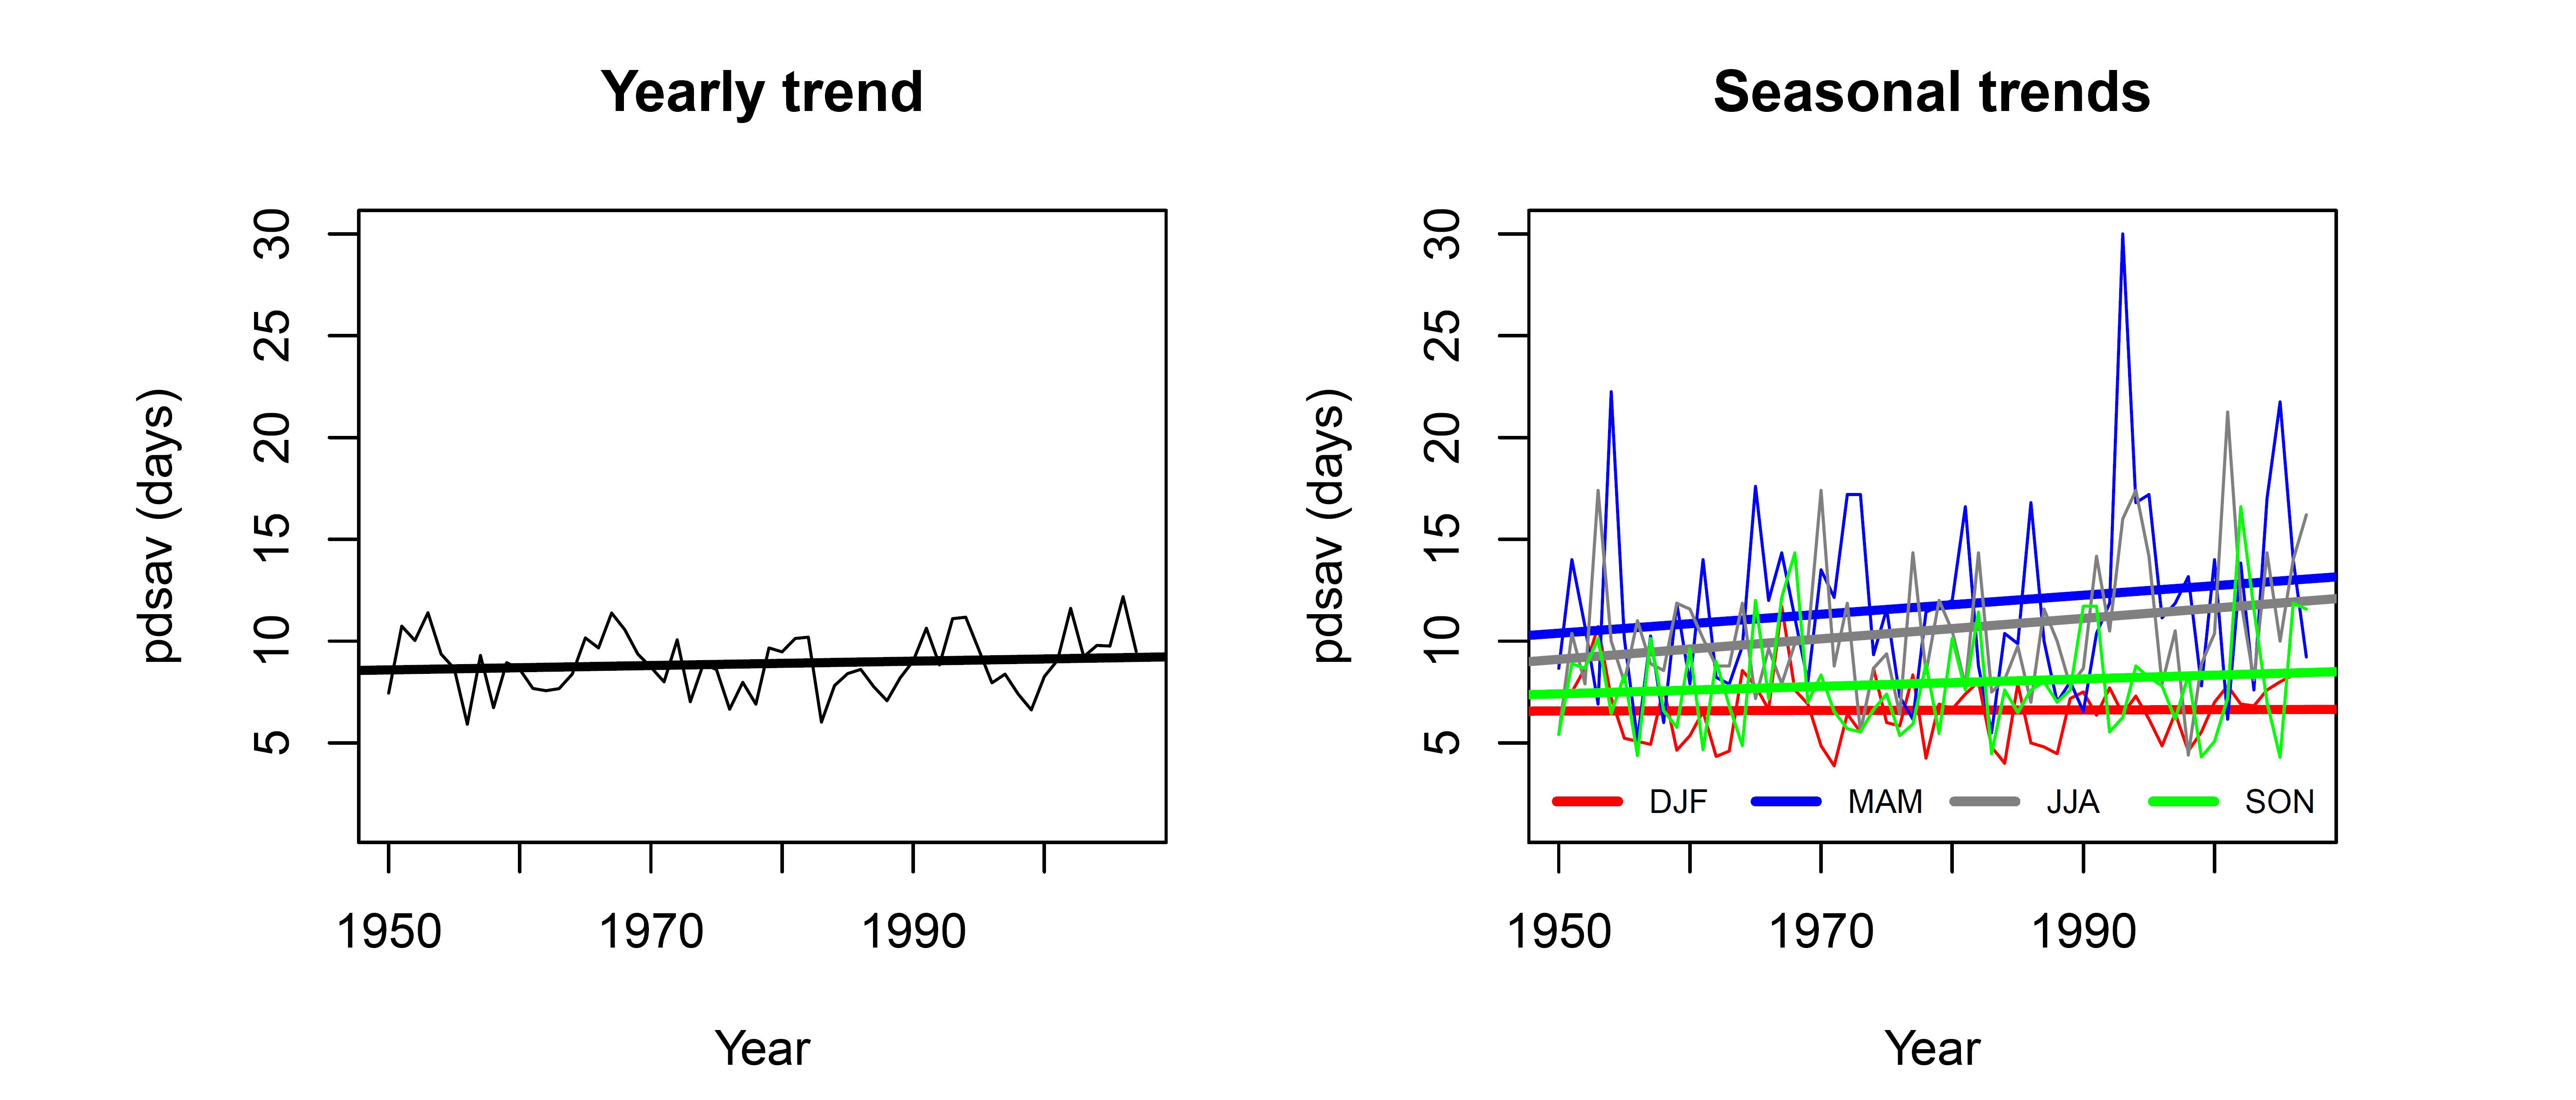 This is a set of two graphs showing the mean annual dry spell length (left) and seasonal dry spell length for December to January (DJF), March to May (MAM), June to August (JJA) and September to November (SON). Dry spell lengths are expressed in days. Mean dry spell lengths have also increased, with the average time between rainfall events now three days longer during June to August (i.e. an average dry spell length of 12 days for the period 1986 to 2018).